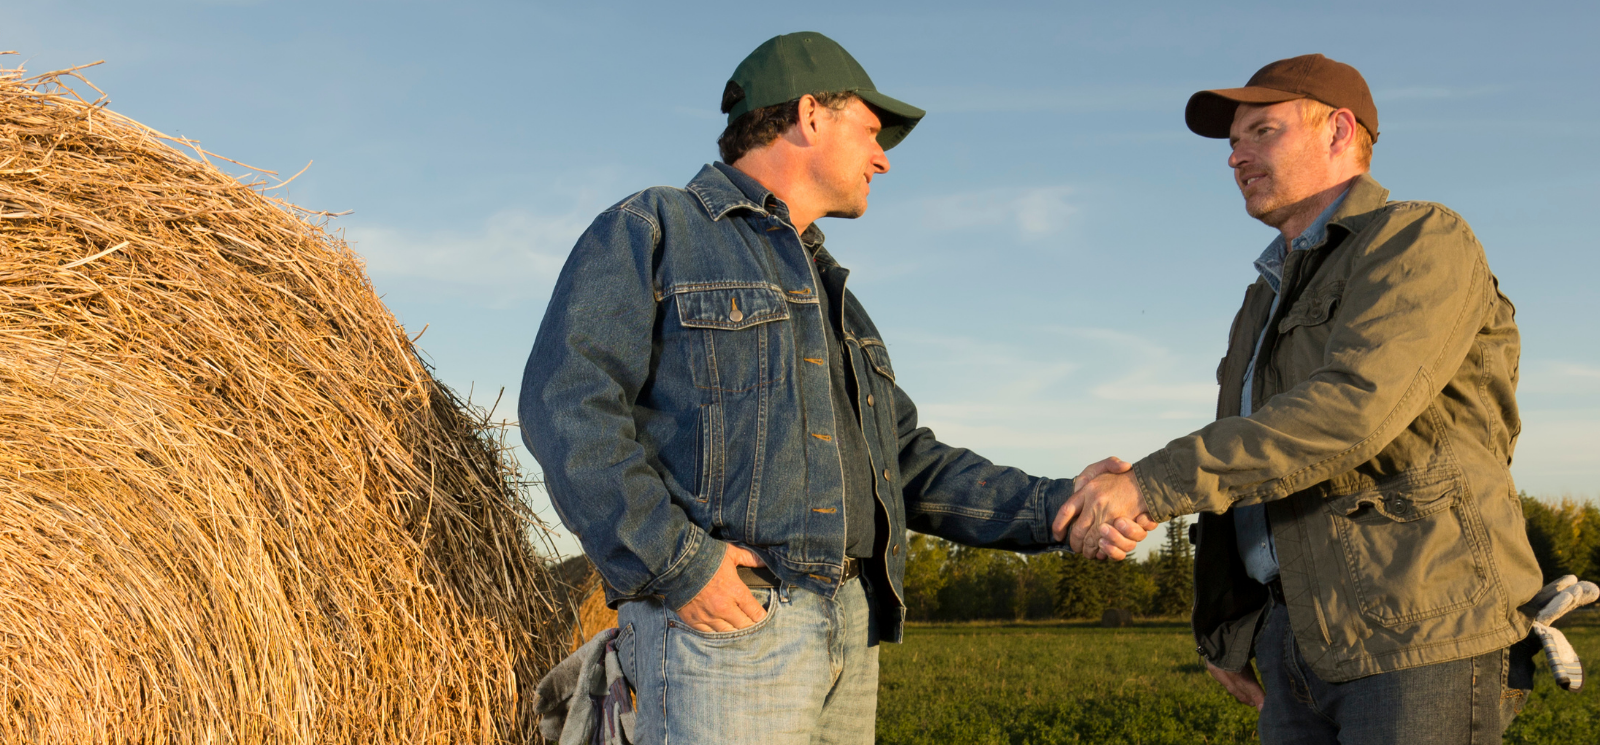 two men wearing baseball caps, jean jacket, and work jacket, and jeans, shaking hands in front of a round bale and a field.